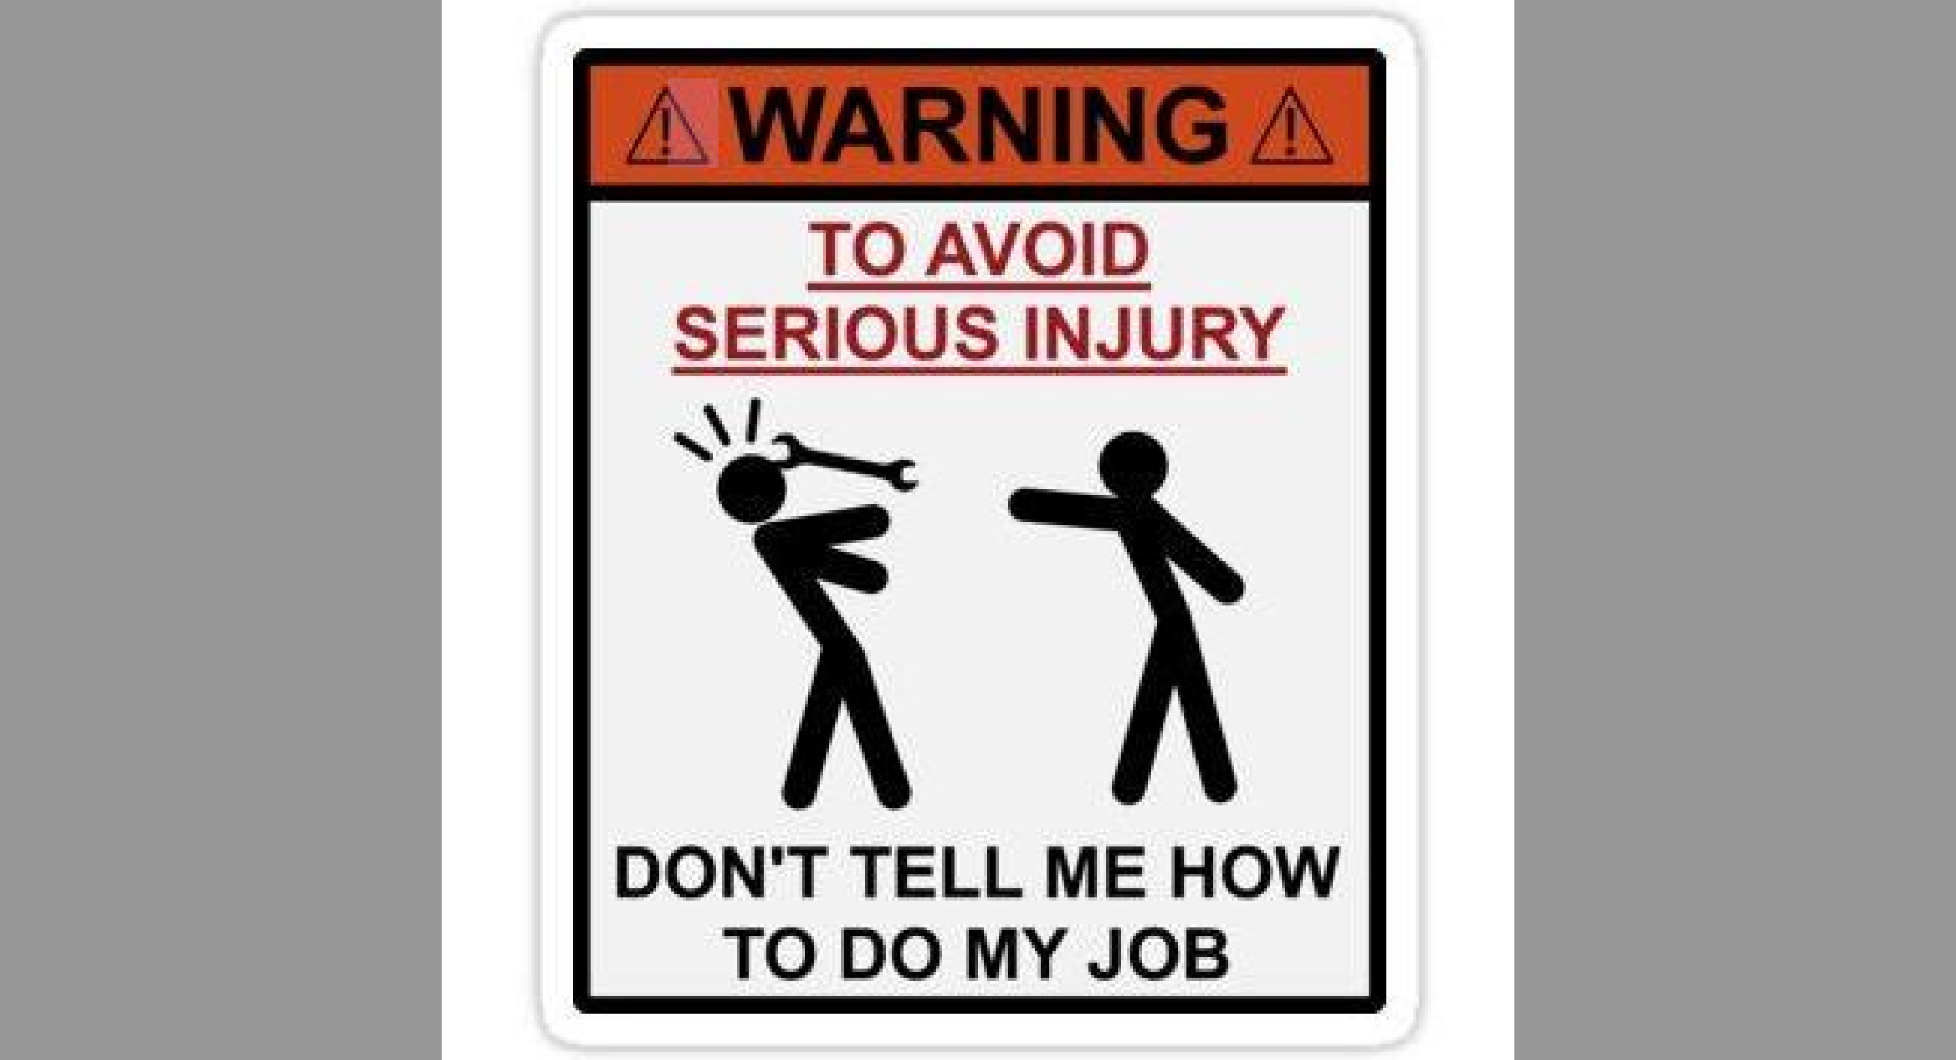 Don t get around. Don't tell me how to do my job. Warning don't tell me how to do my job. Don't tell me how to do my job poster. To avoid injury don't tell me how to do my job перевод.